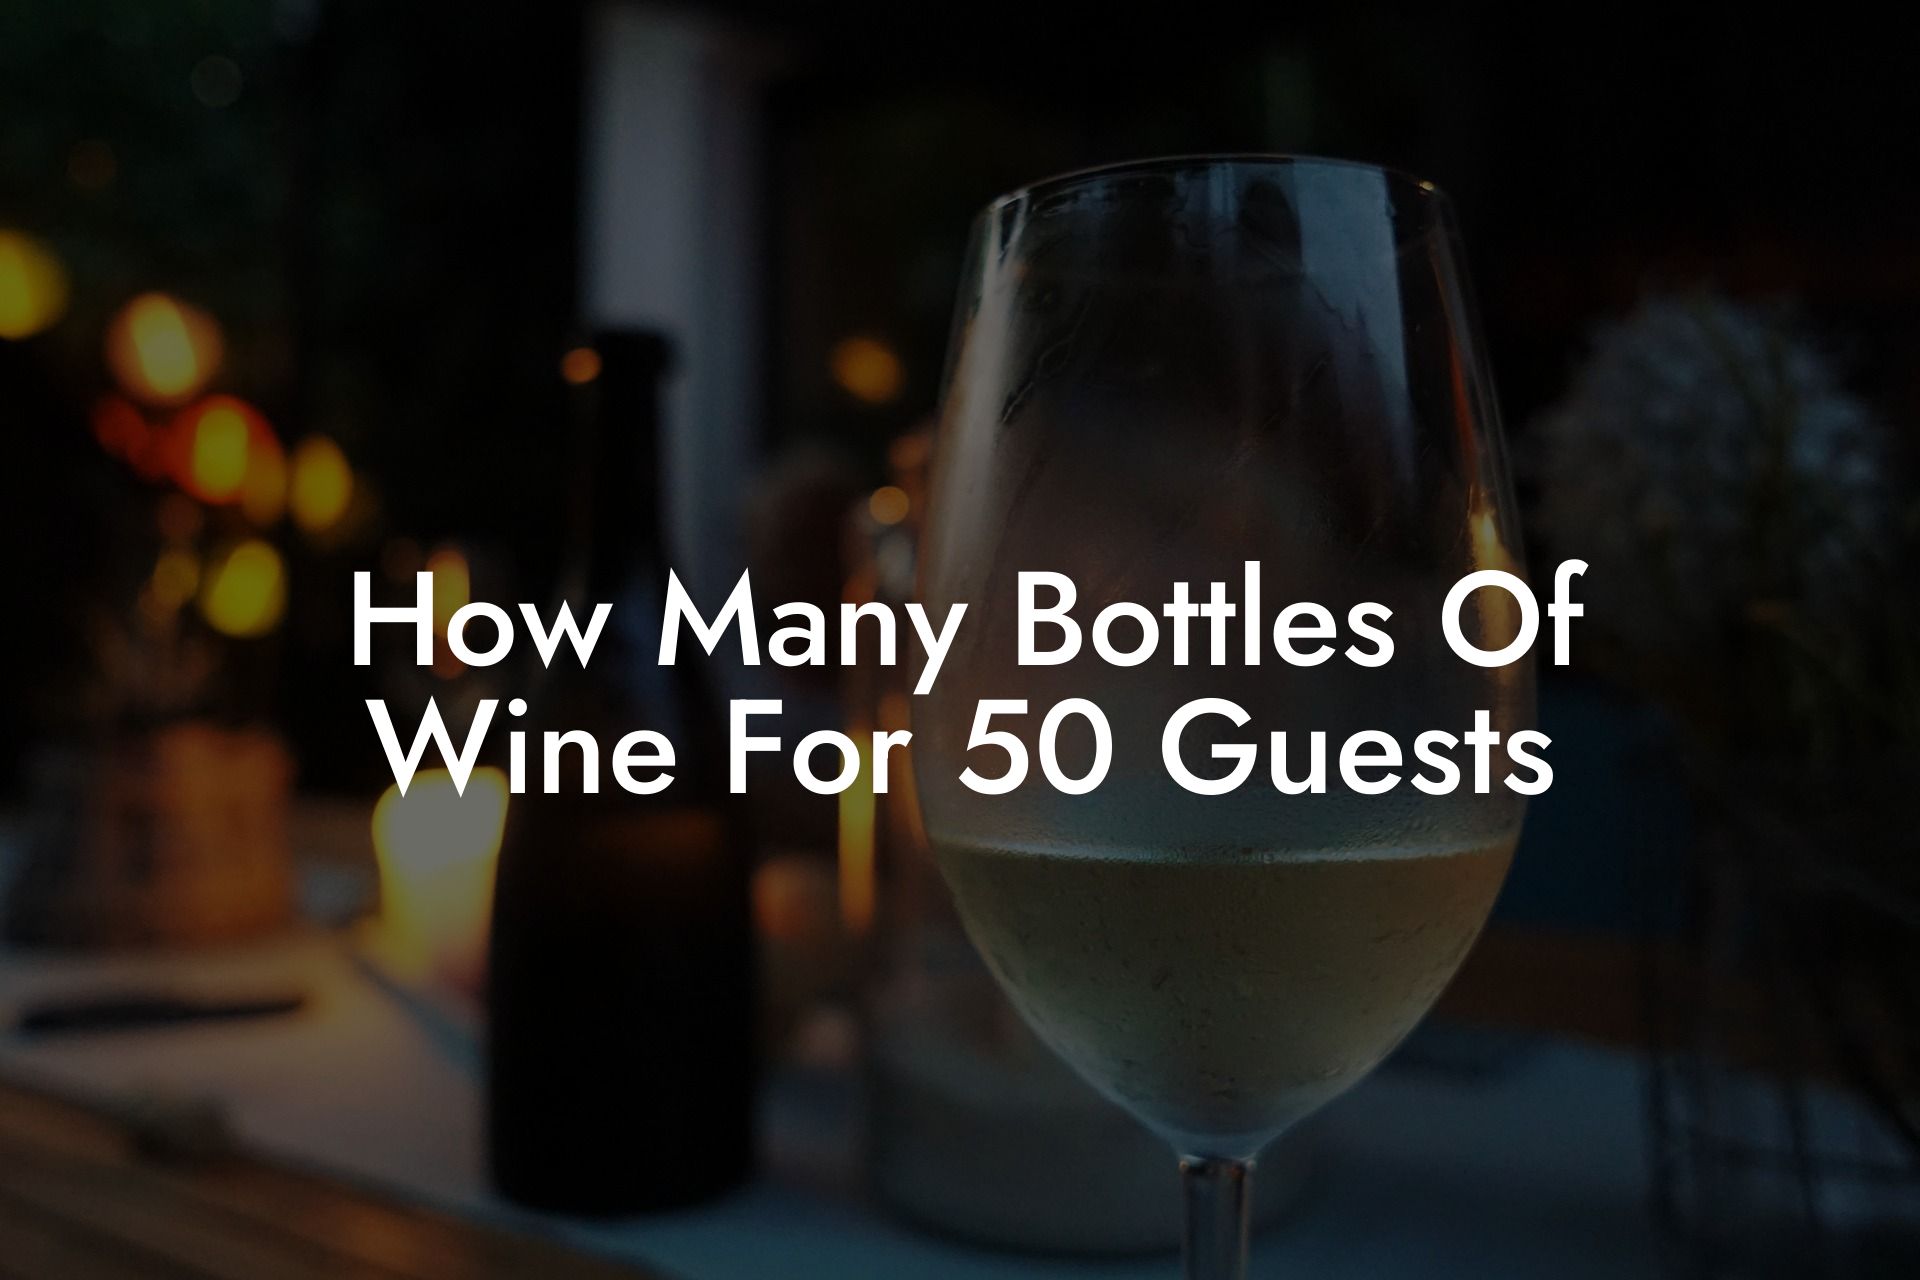 How Many Bottles Of Wine For 50 Guests